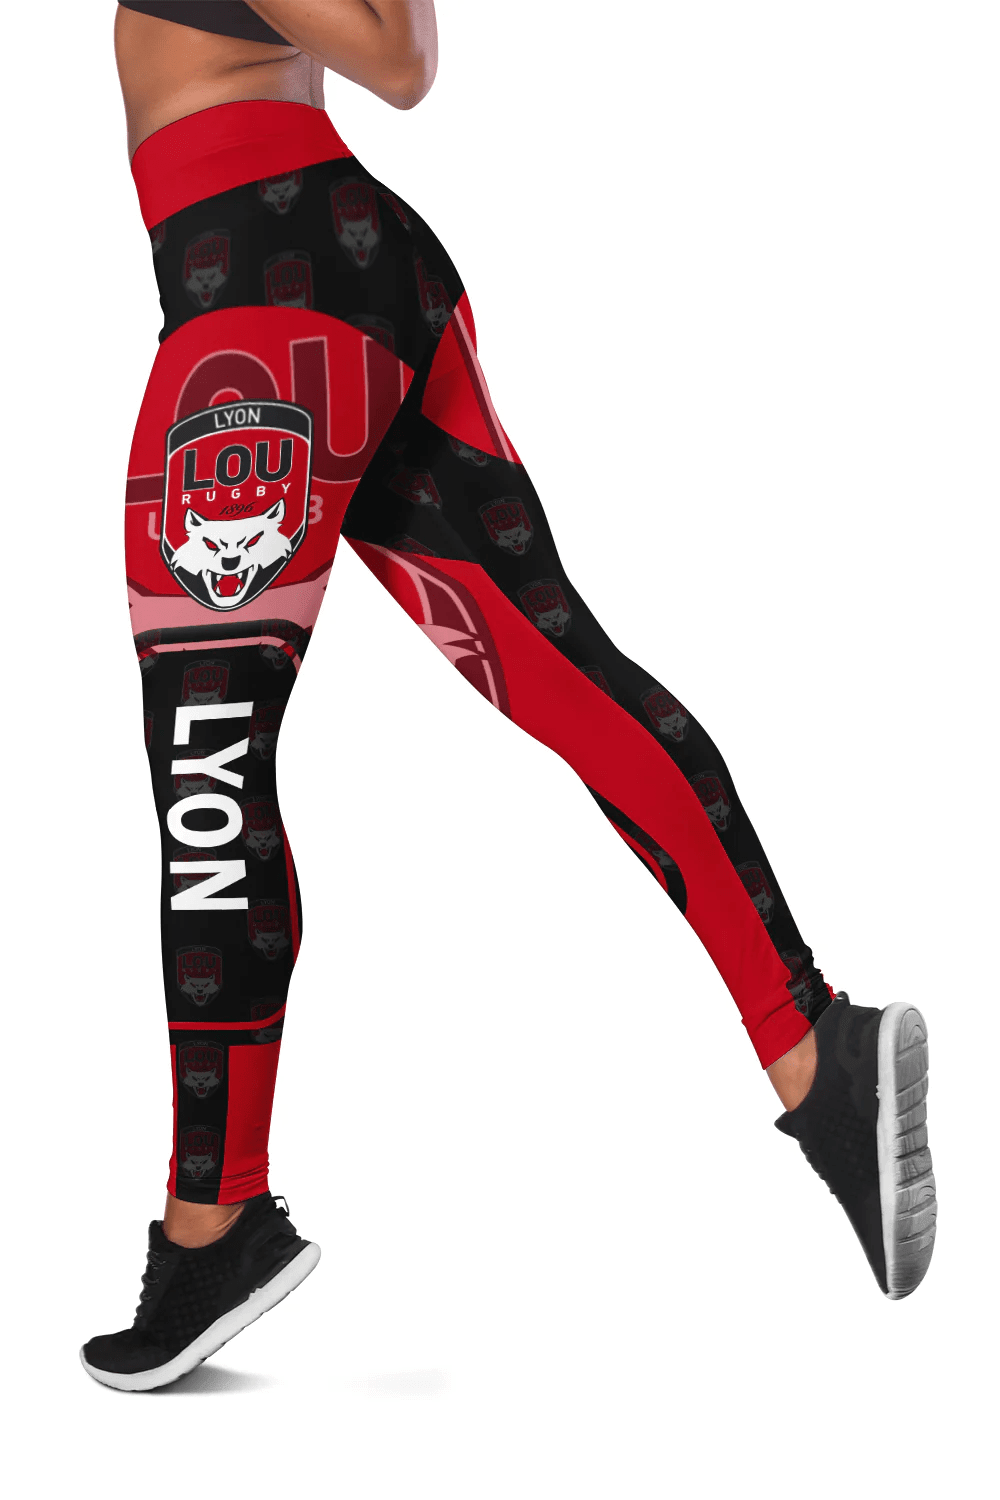 Lyon Rugby New Legging Style